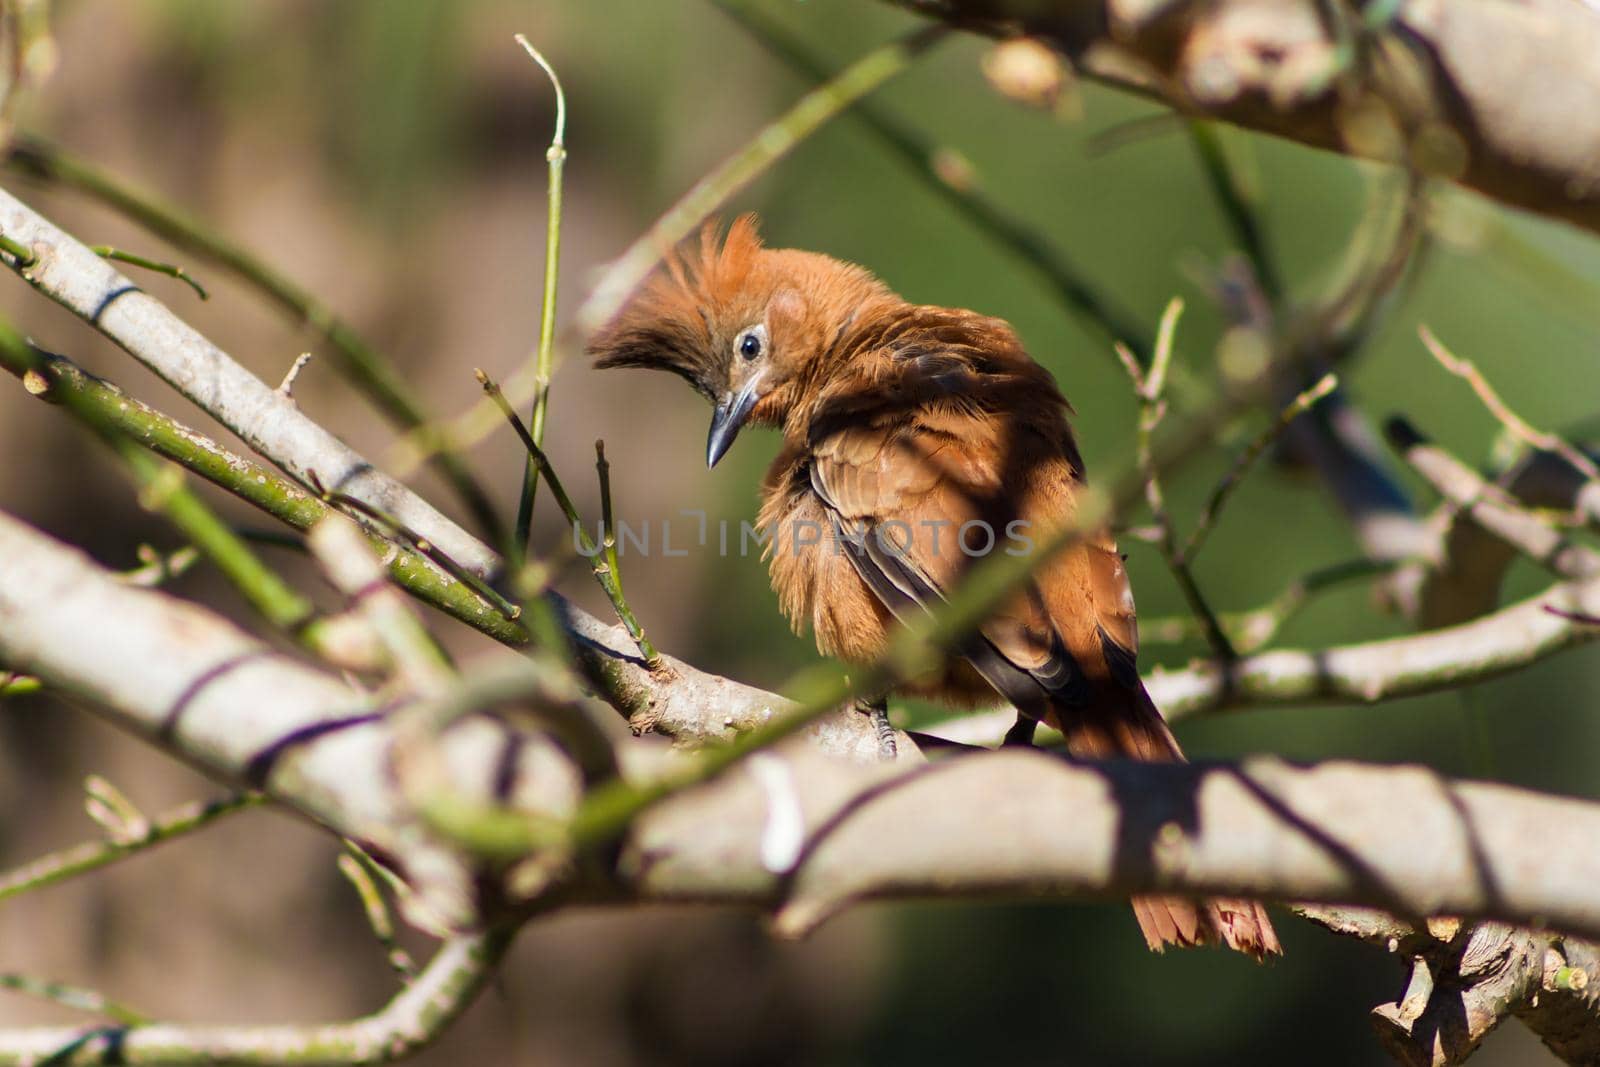 Pseudoseisura lophotes, bird that inhabits South America, perched on the branches of the tree